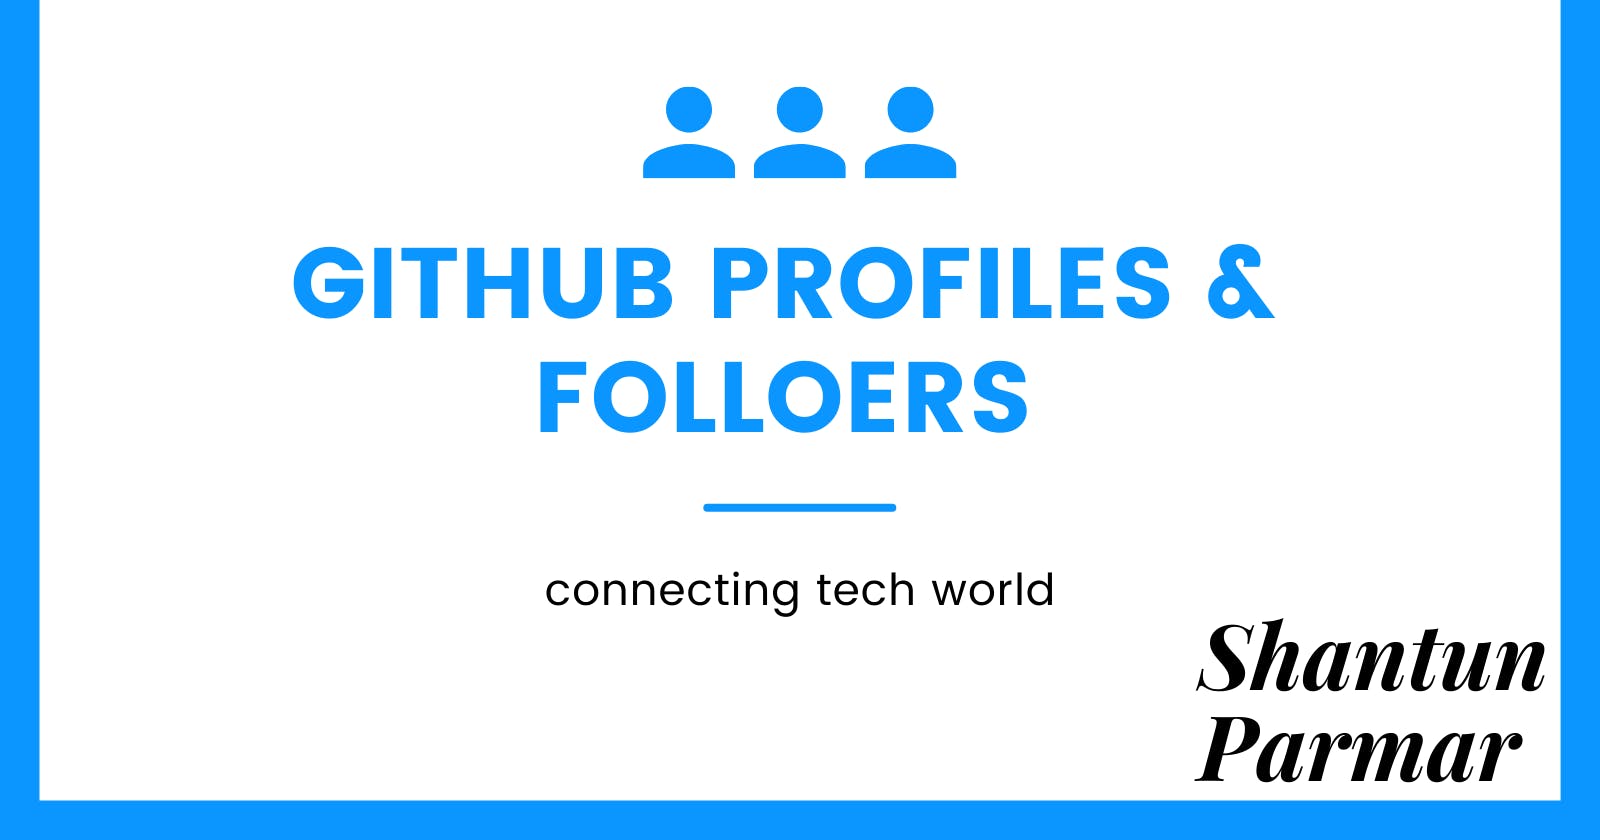 How to get github followers details by using Github API in node.js?